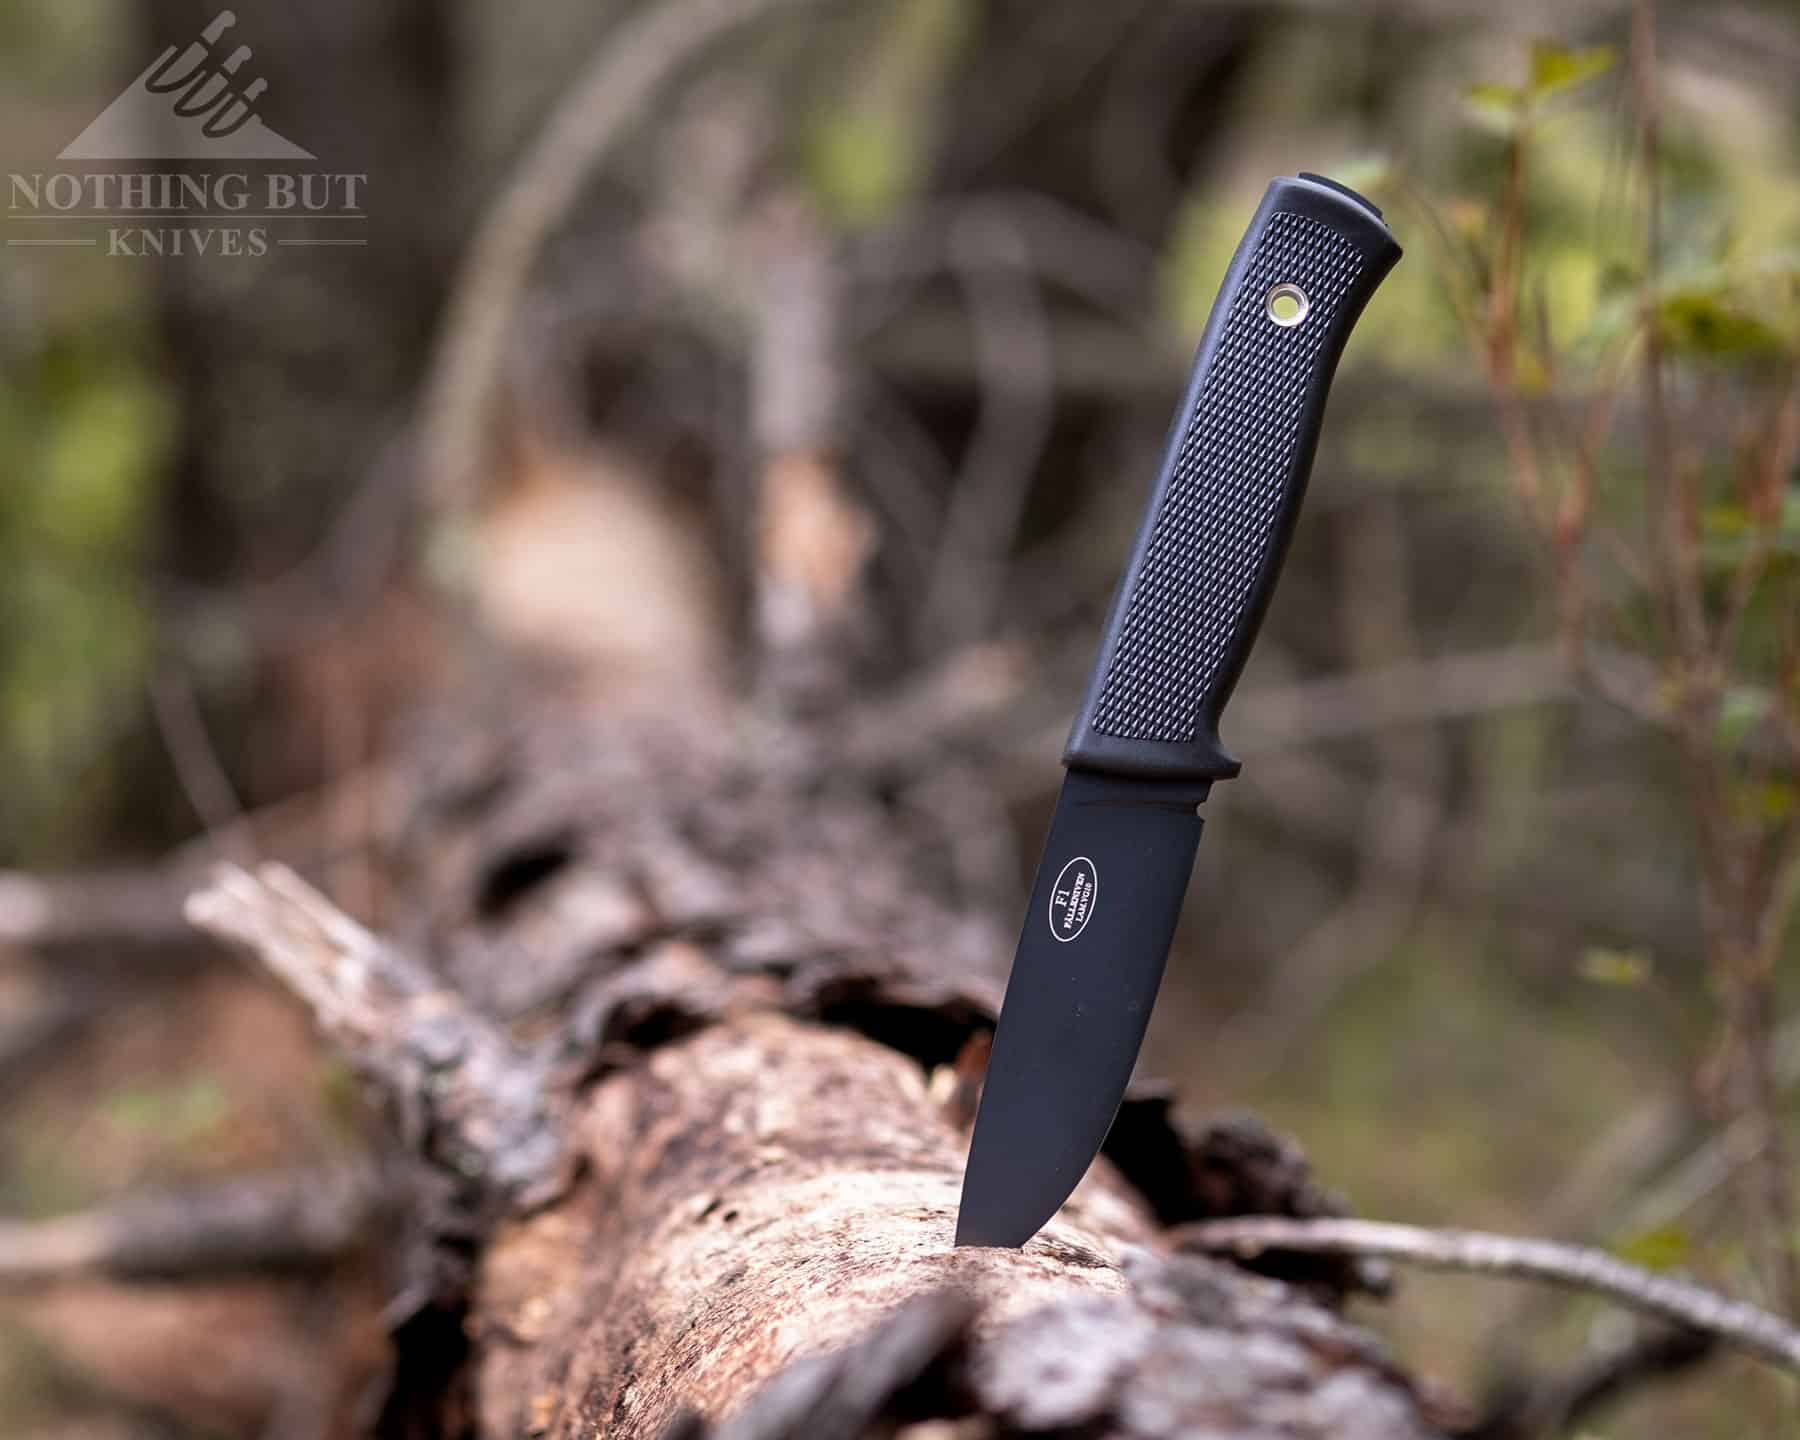 The Fallkniven F1 is a classic survival knife that was specifically designed for military pilots to use in wilderness survival situations. 